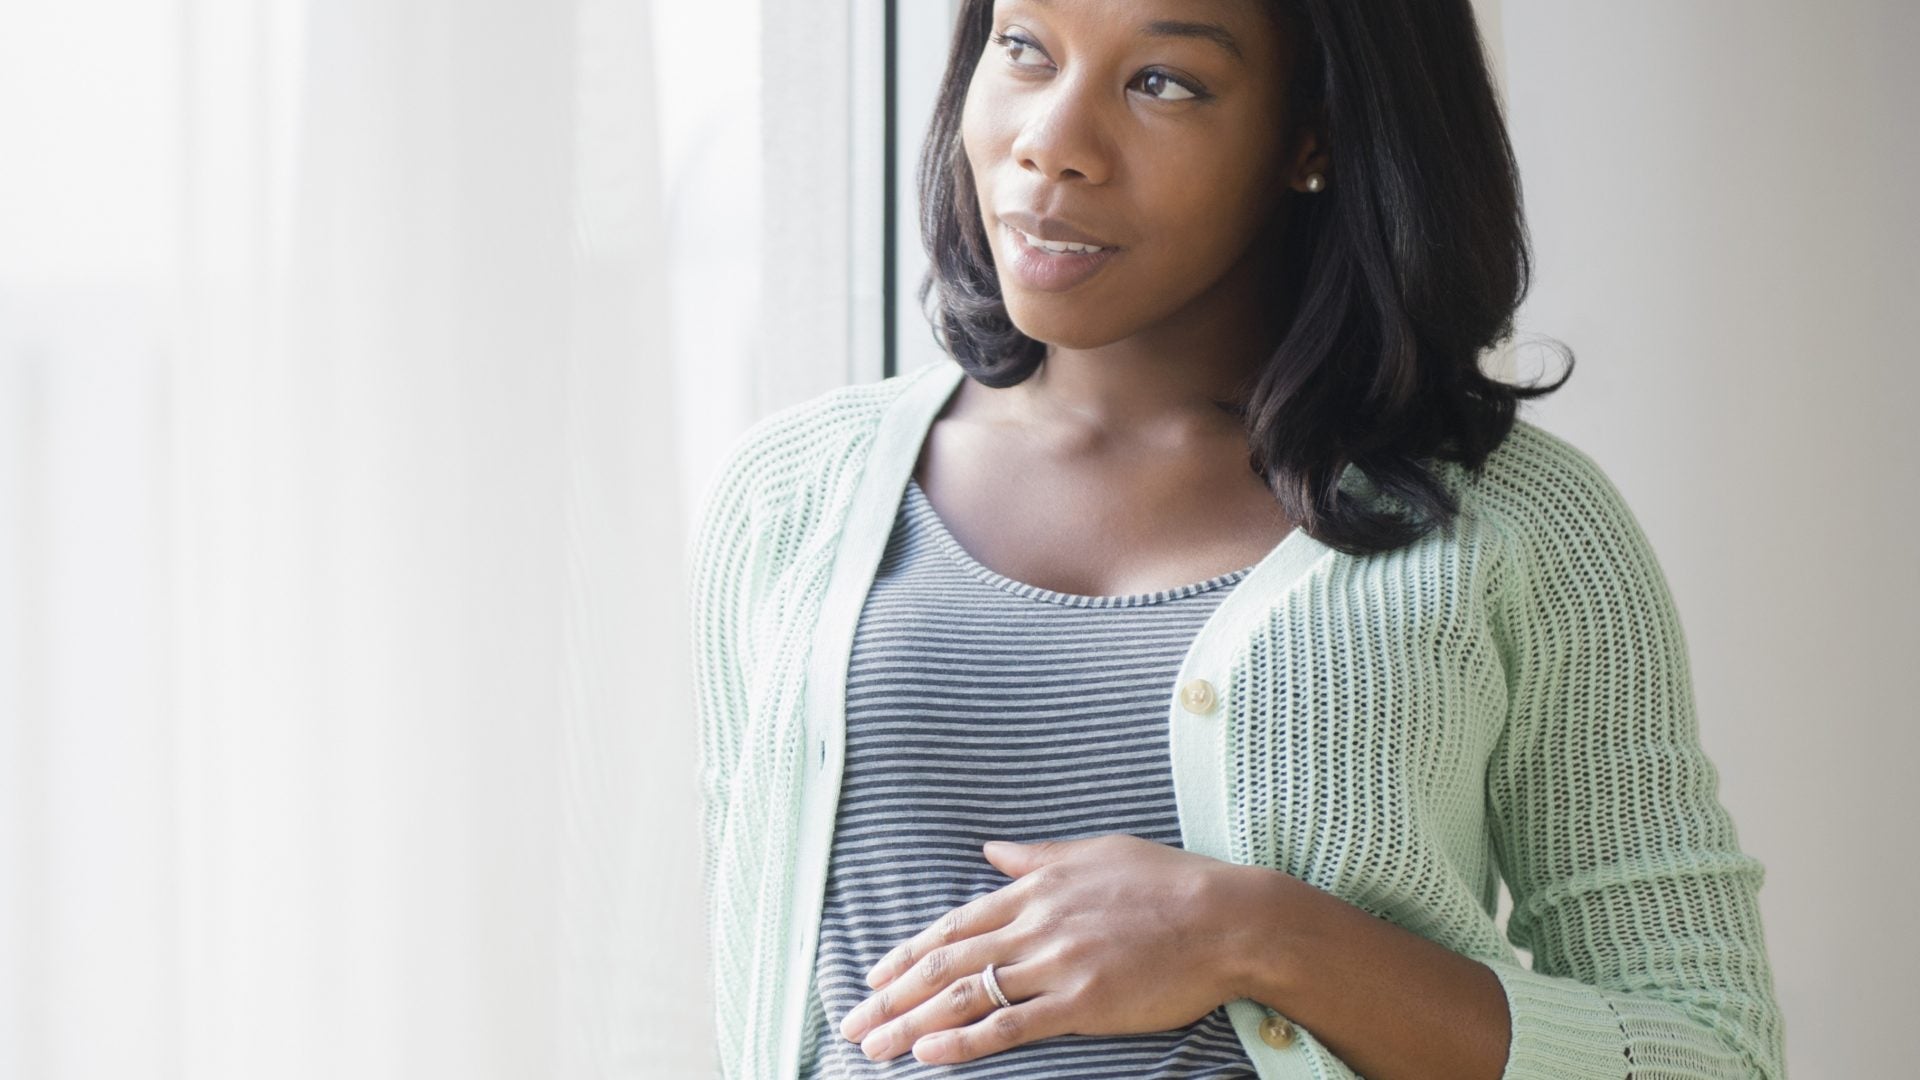 OP-ED: Maternal And Mental Health Are Interconnected